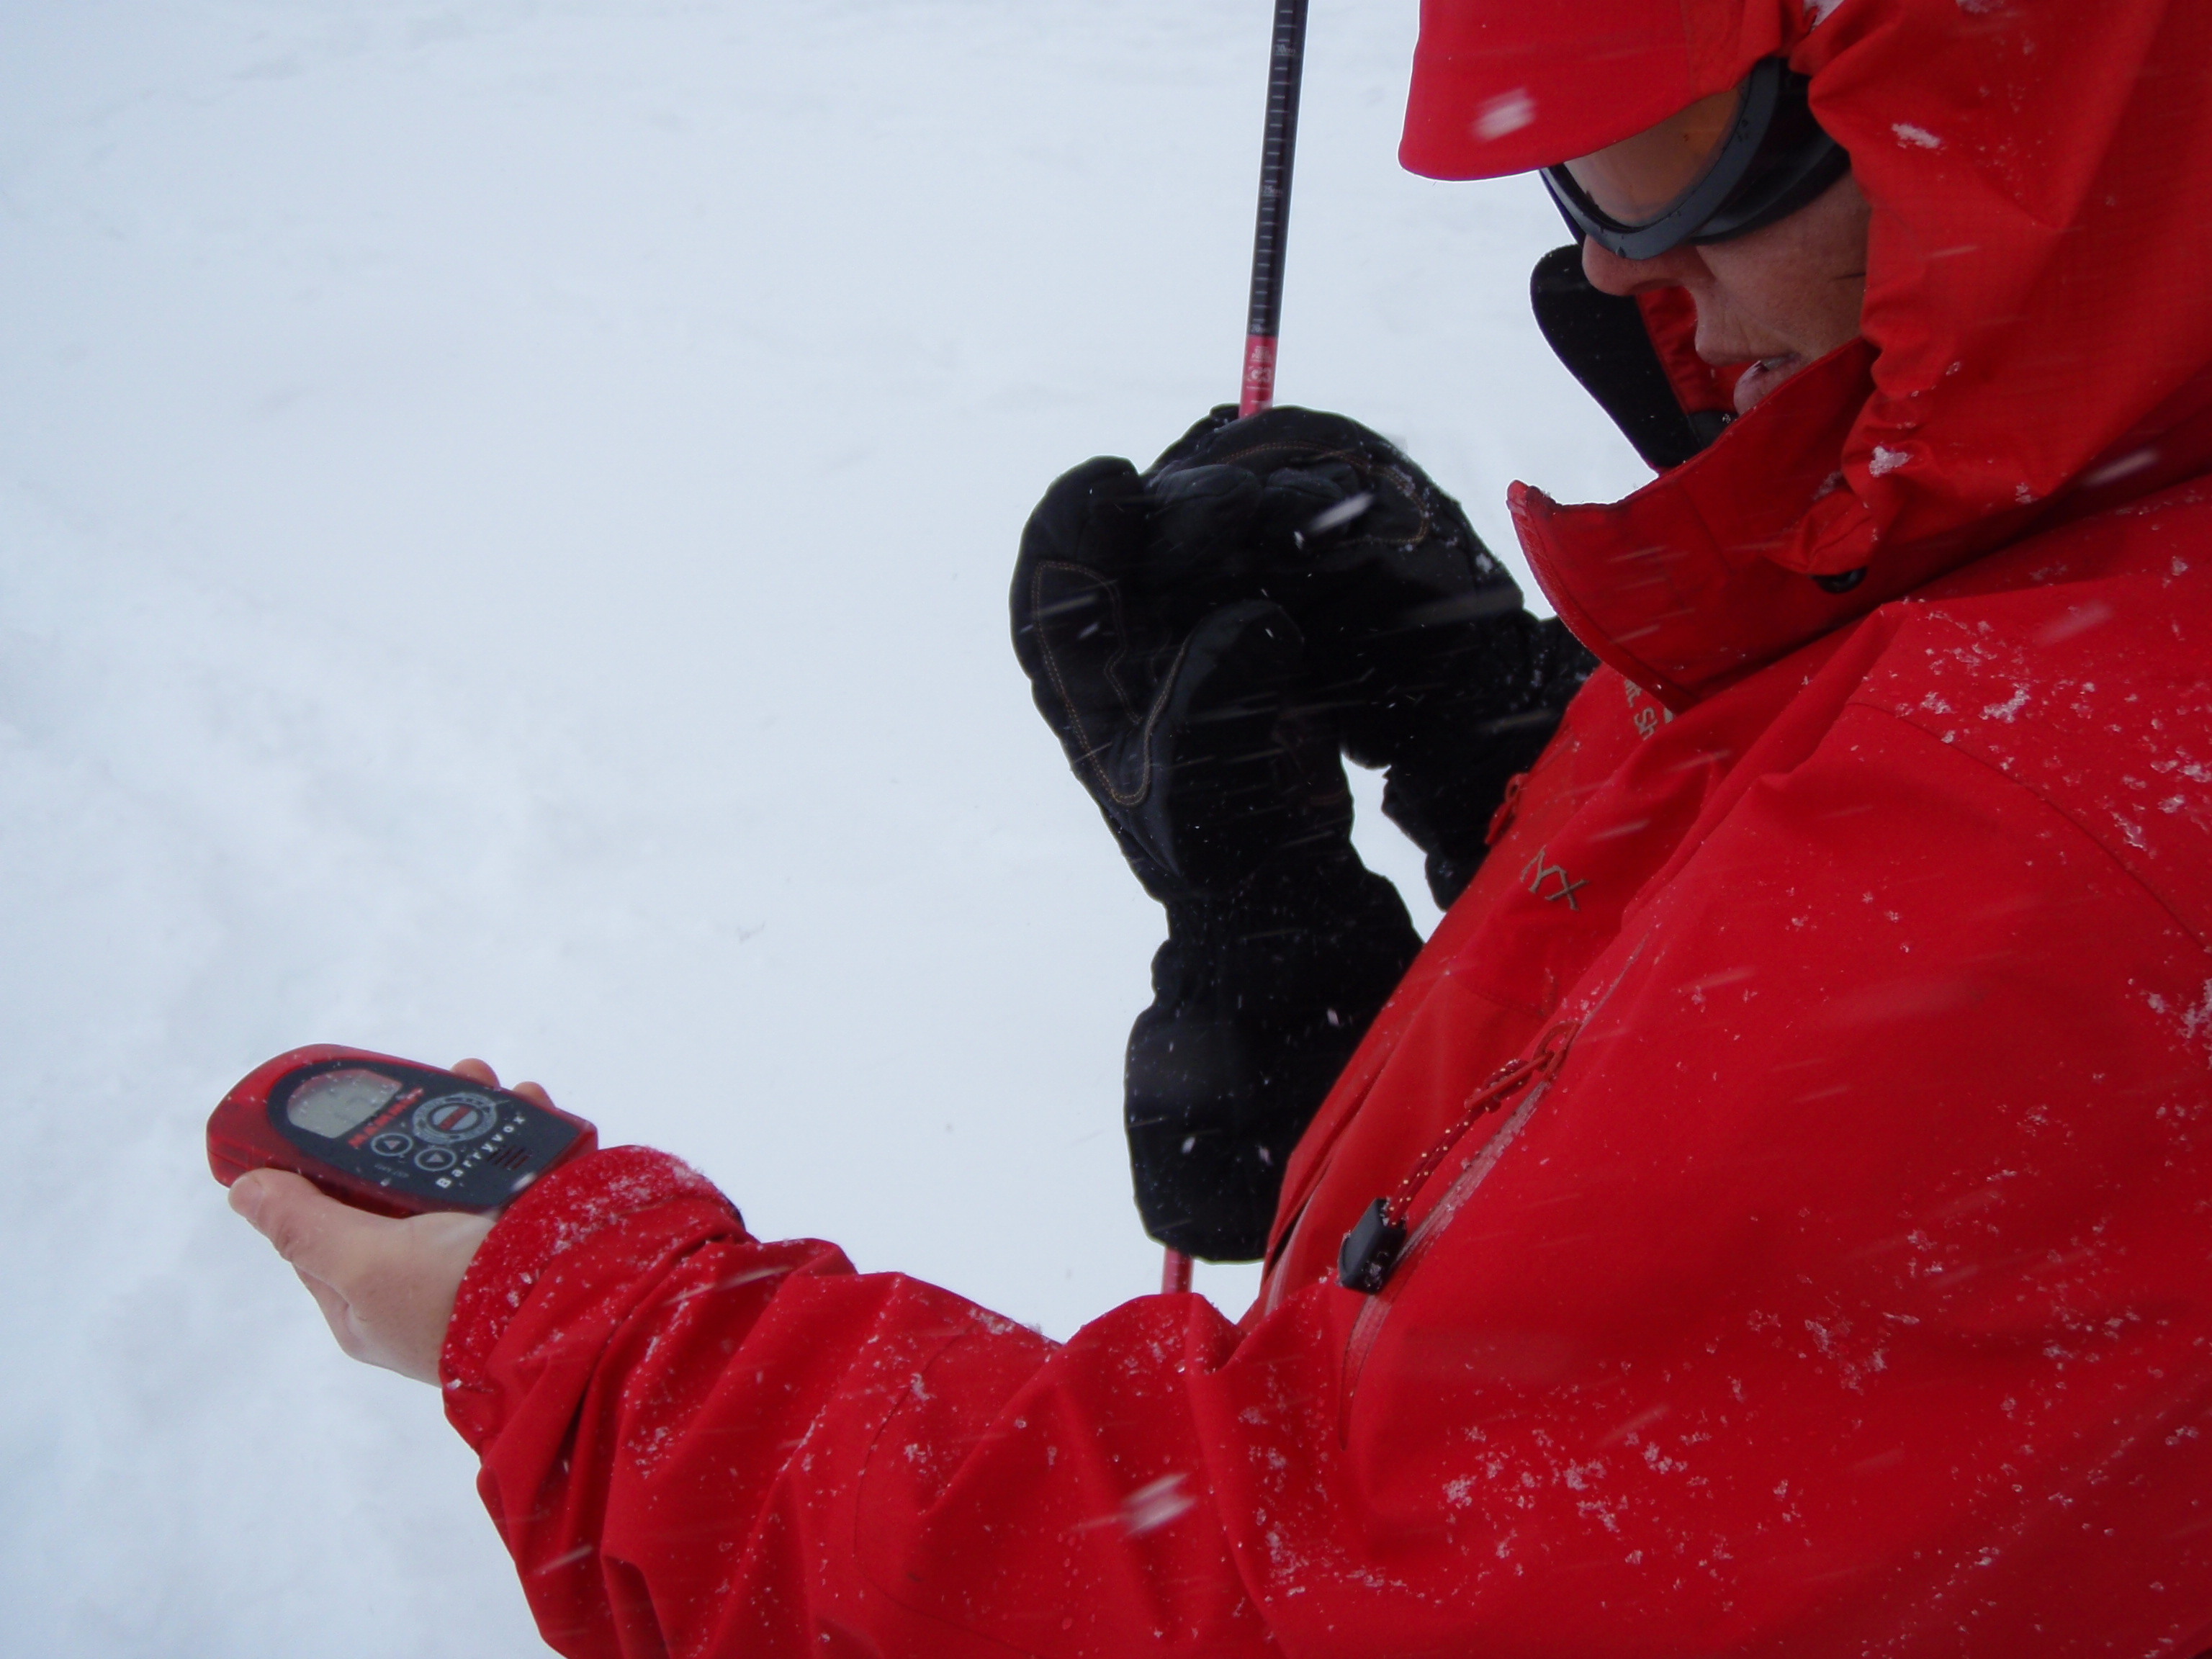 Woman practicing with her avalanche transceiver and probe in the snow.